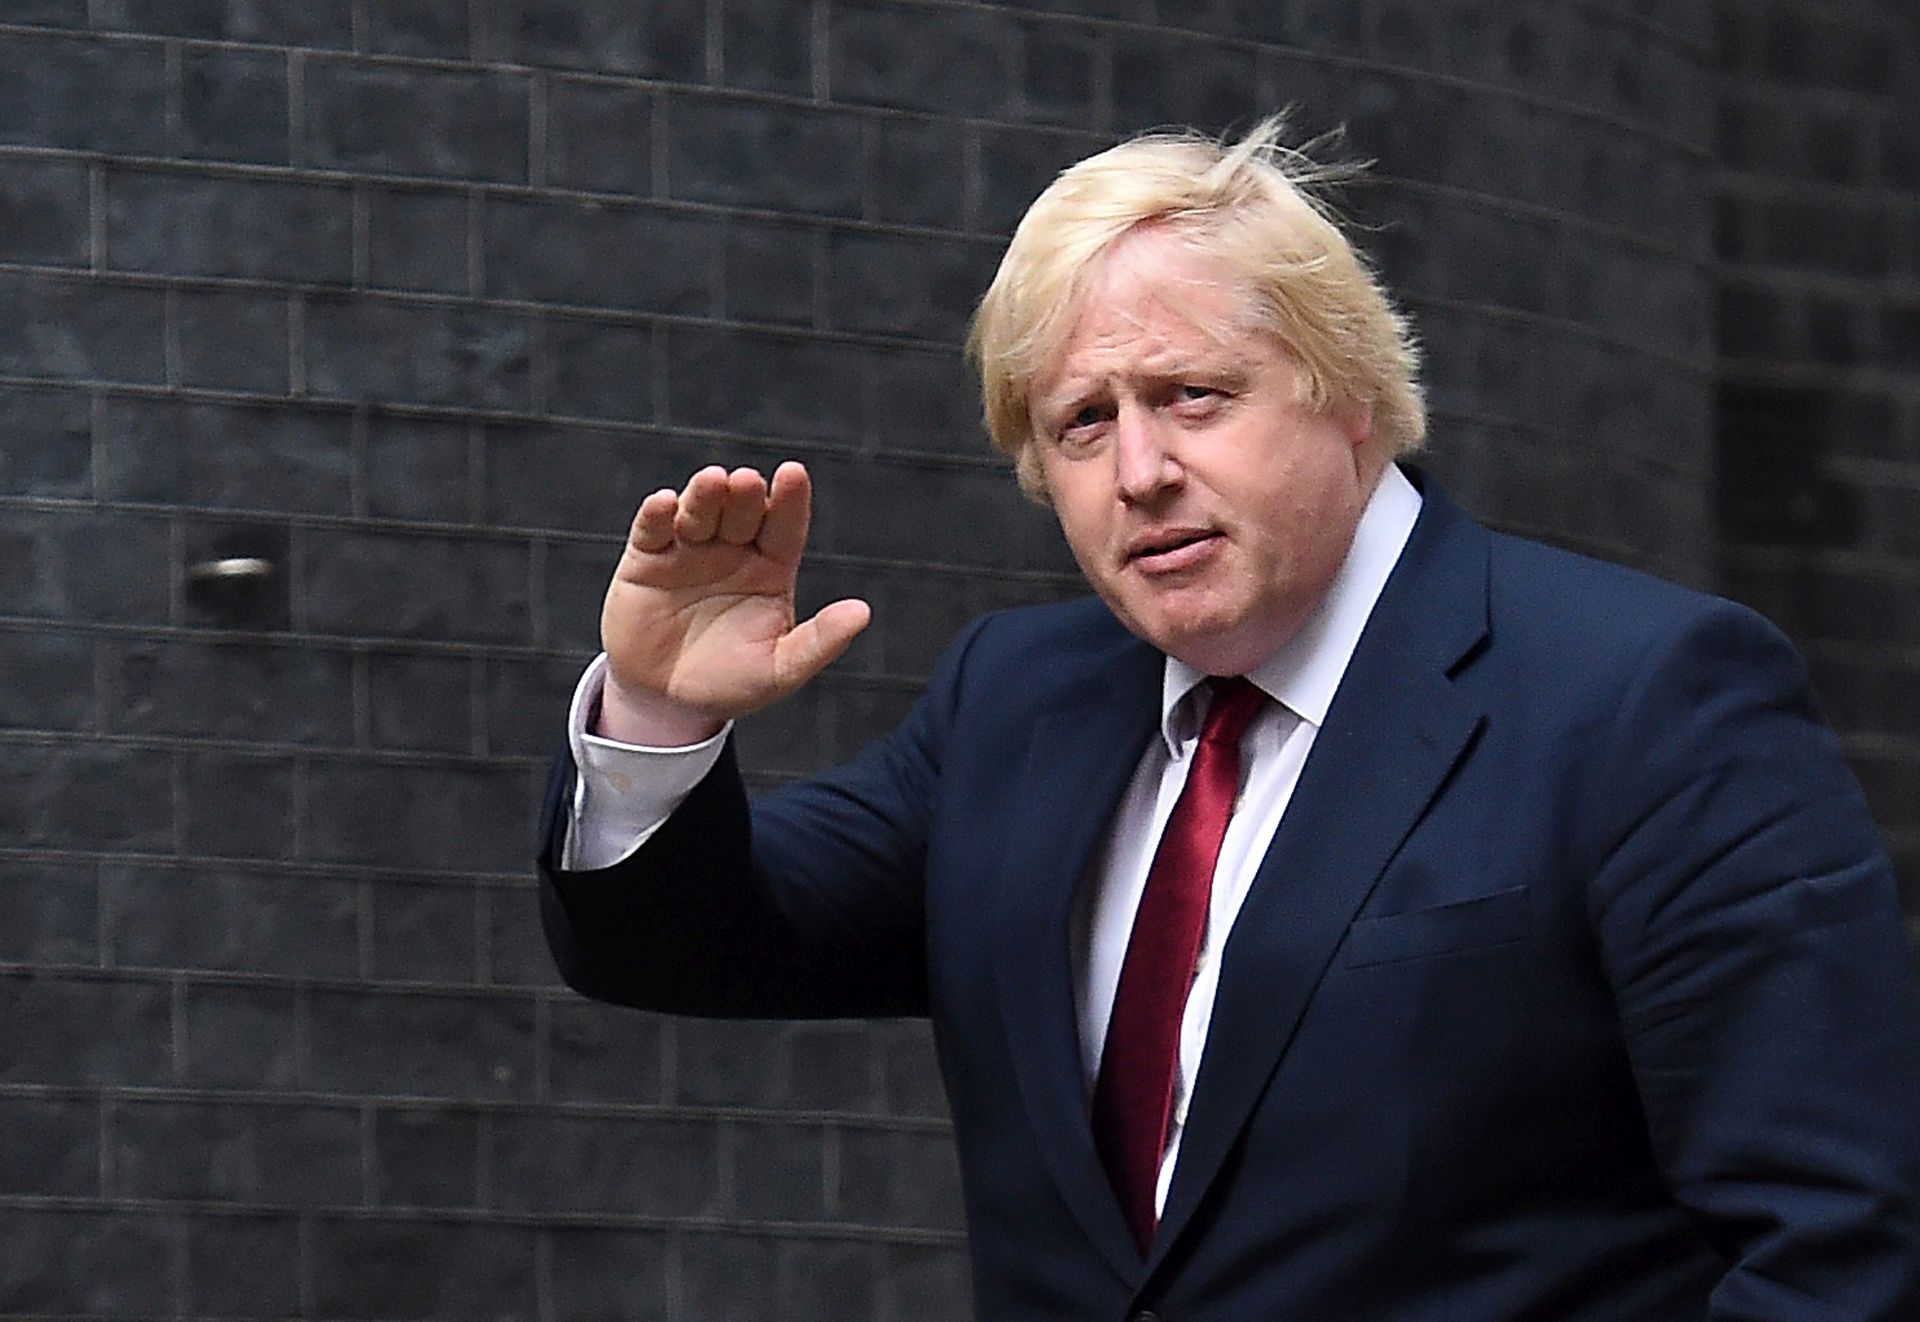 epa05423642 New Foreign Secretary Boris Johnson arrives at No.10 Downing Street after being summoned by new British Prime Minister Theresa May in London, Britain, 13 July 2016. Theresa May has appointed Boris Johnson Foreign Secretary in her first Cabinet as Prime Minister.  EPA/ANDY RAIN